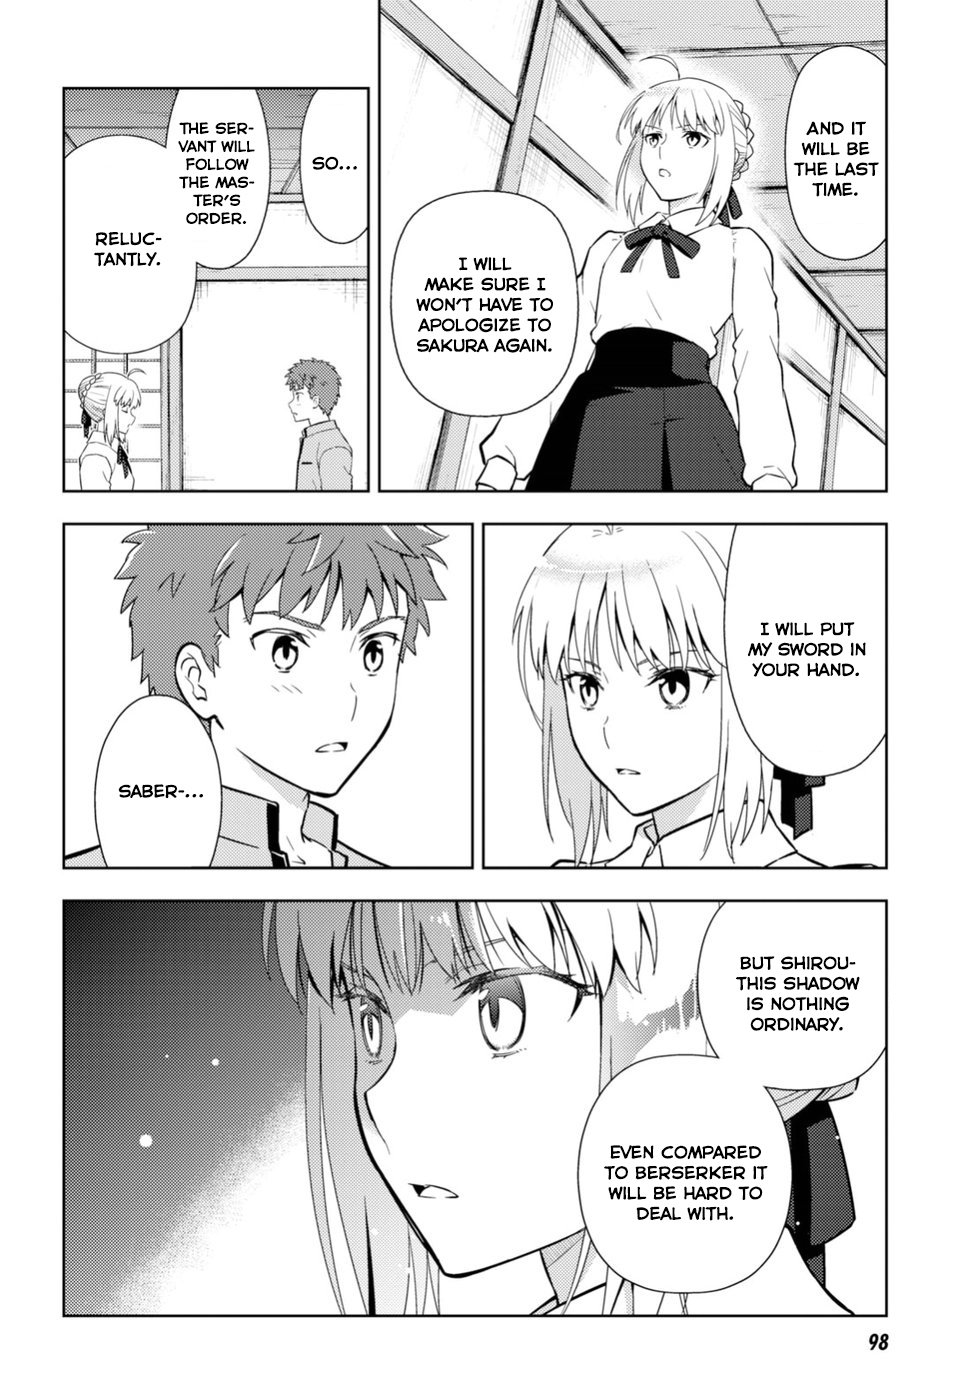 Fate/stay night: Heaven's Feel Vol. 8 Ch. 48 Day 7 / Madness (3)